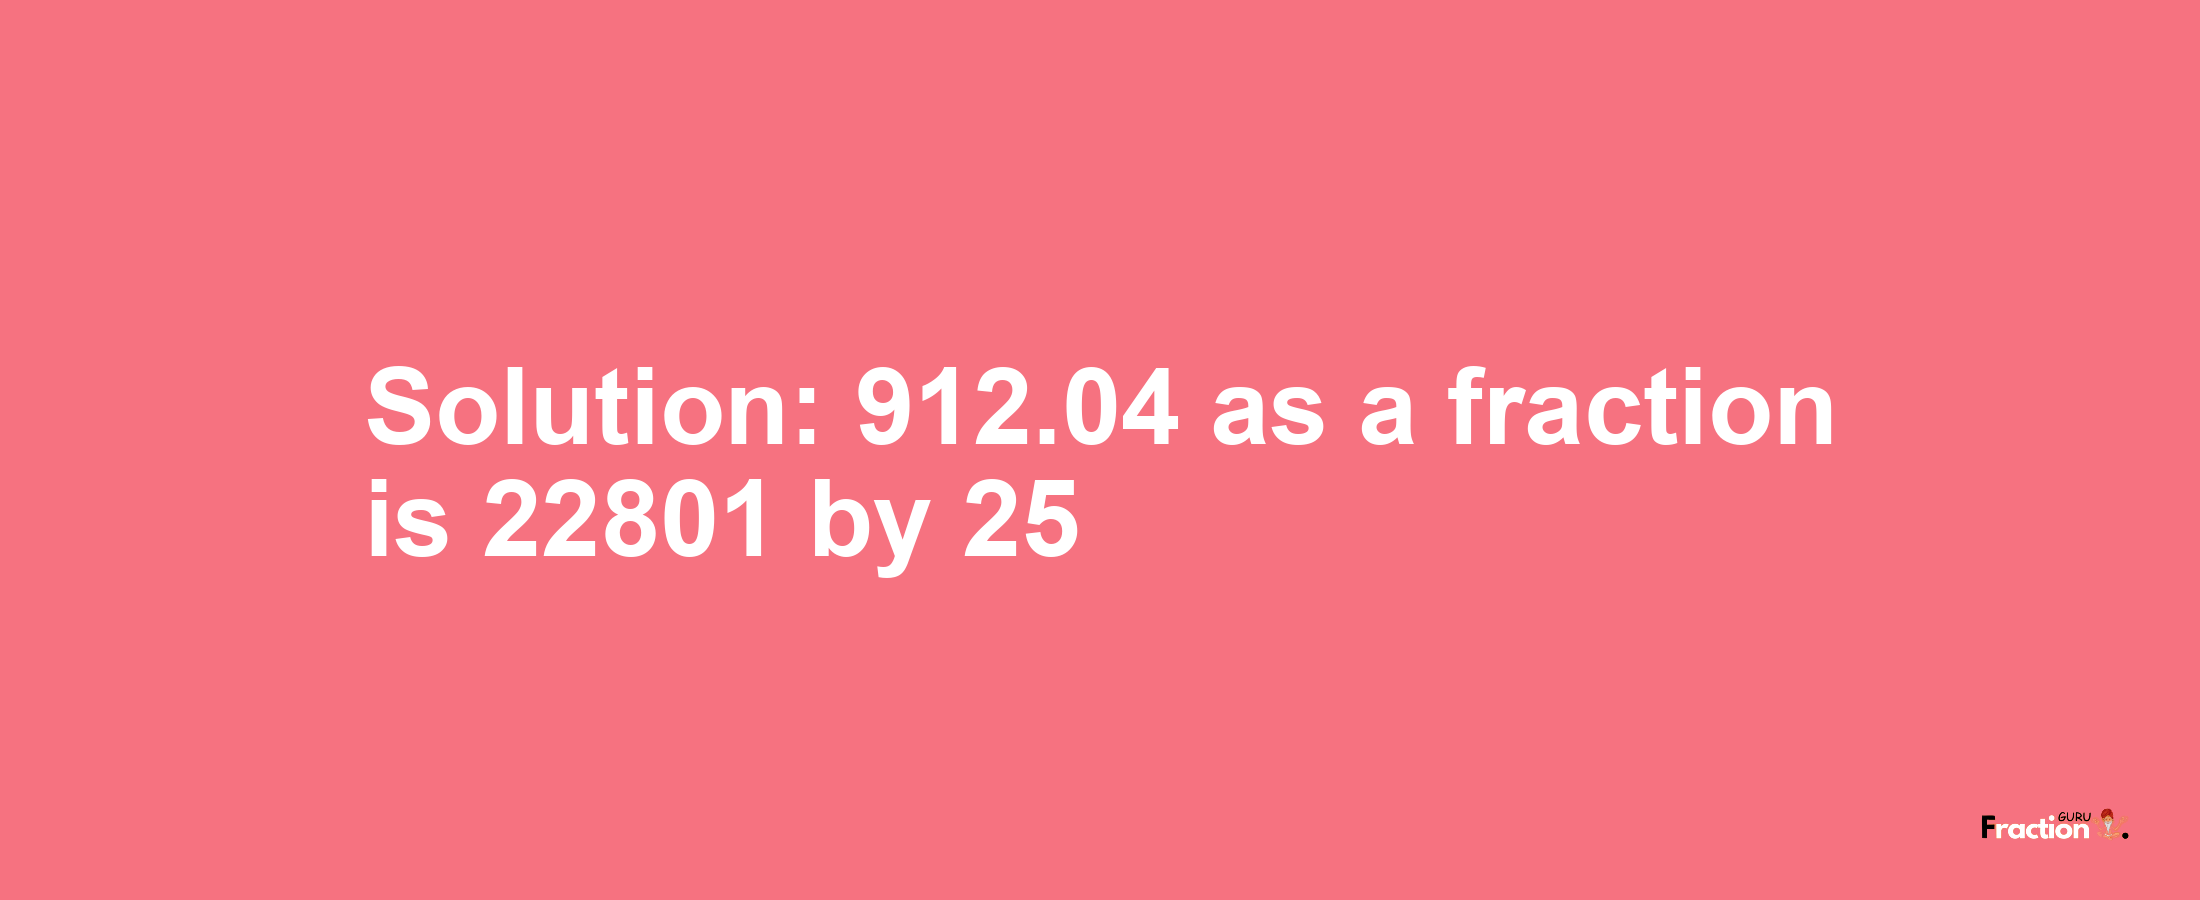 Solution:912.04 as a fraction is 22801/25